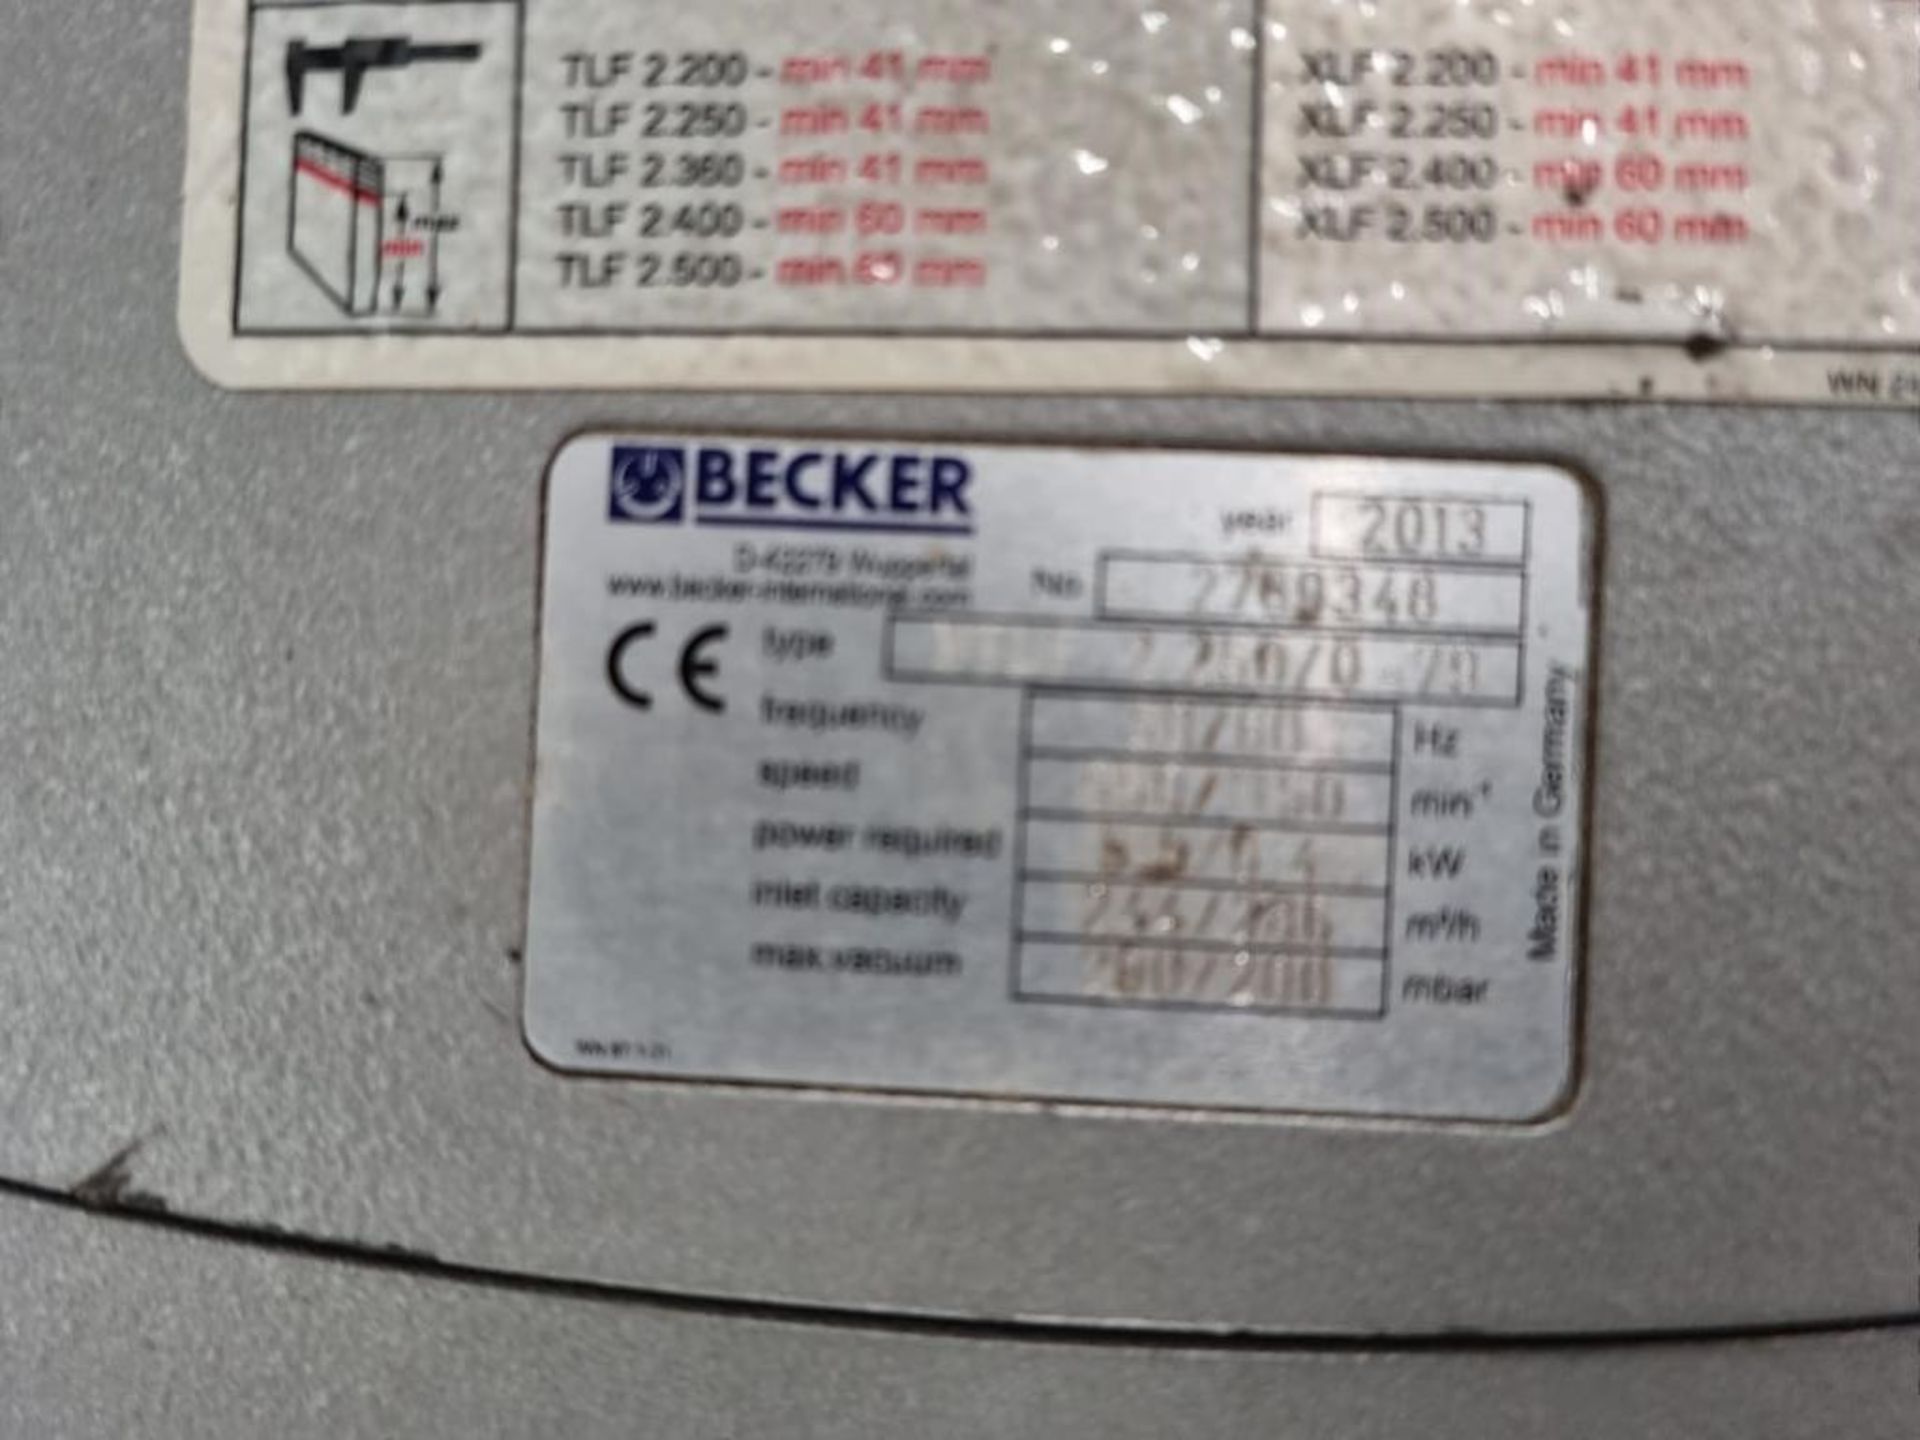 Becker Vacuum Pump, year of manufacture 2013, loading free of charge - yes, lot located at Unicorn - Image 2 of 2